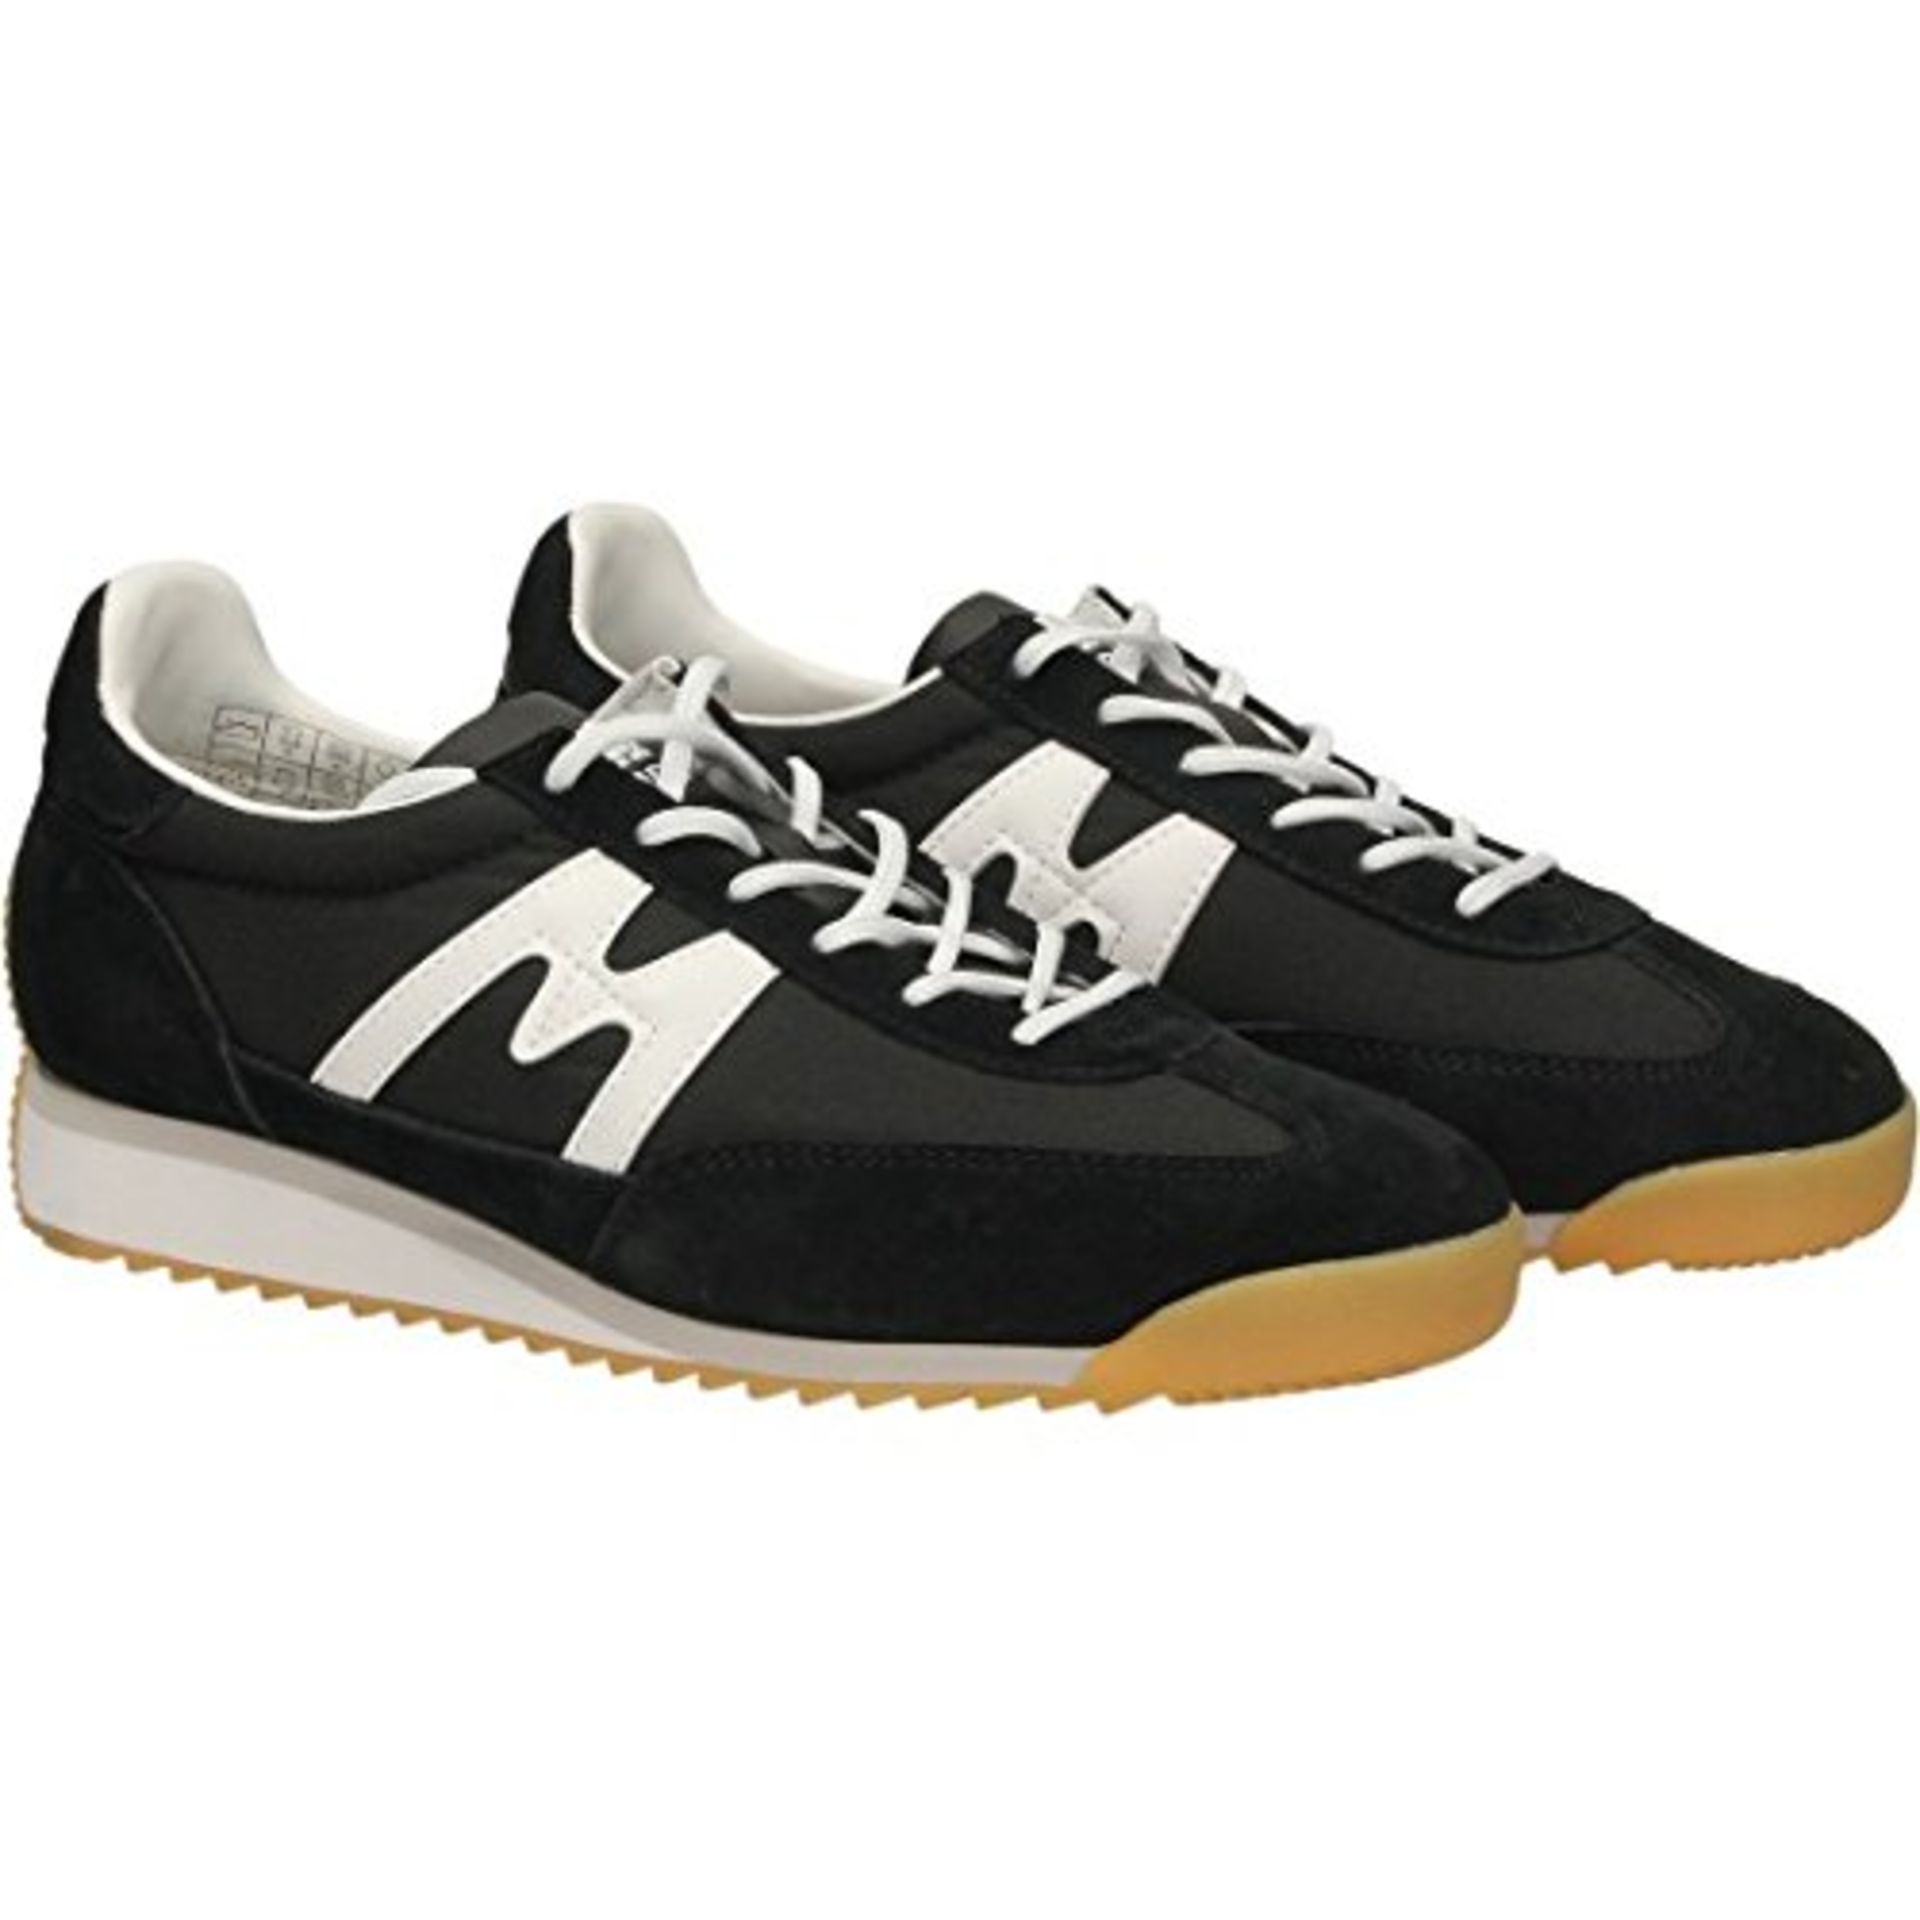 1 x Karhu Sneaker Model Champion Air in Suede and Nylon Black - - 45 F805003 Size: 45 | EAN: 084617